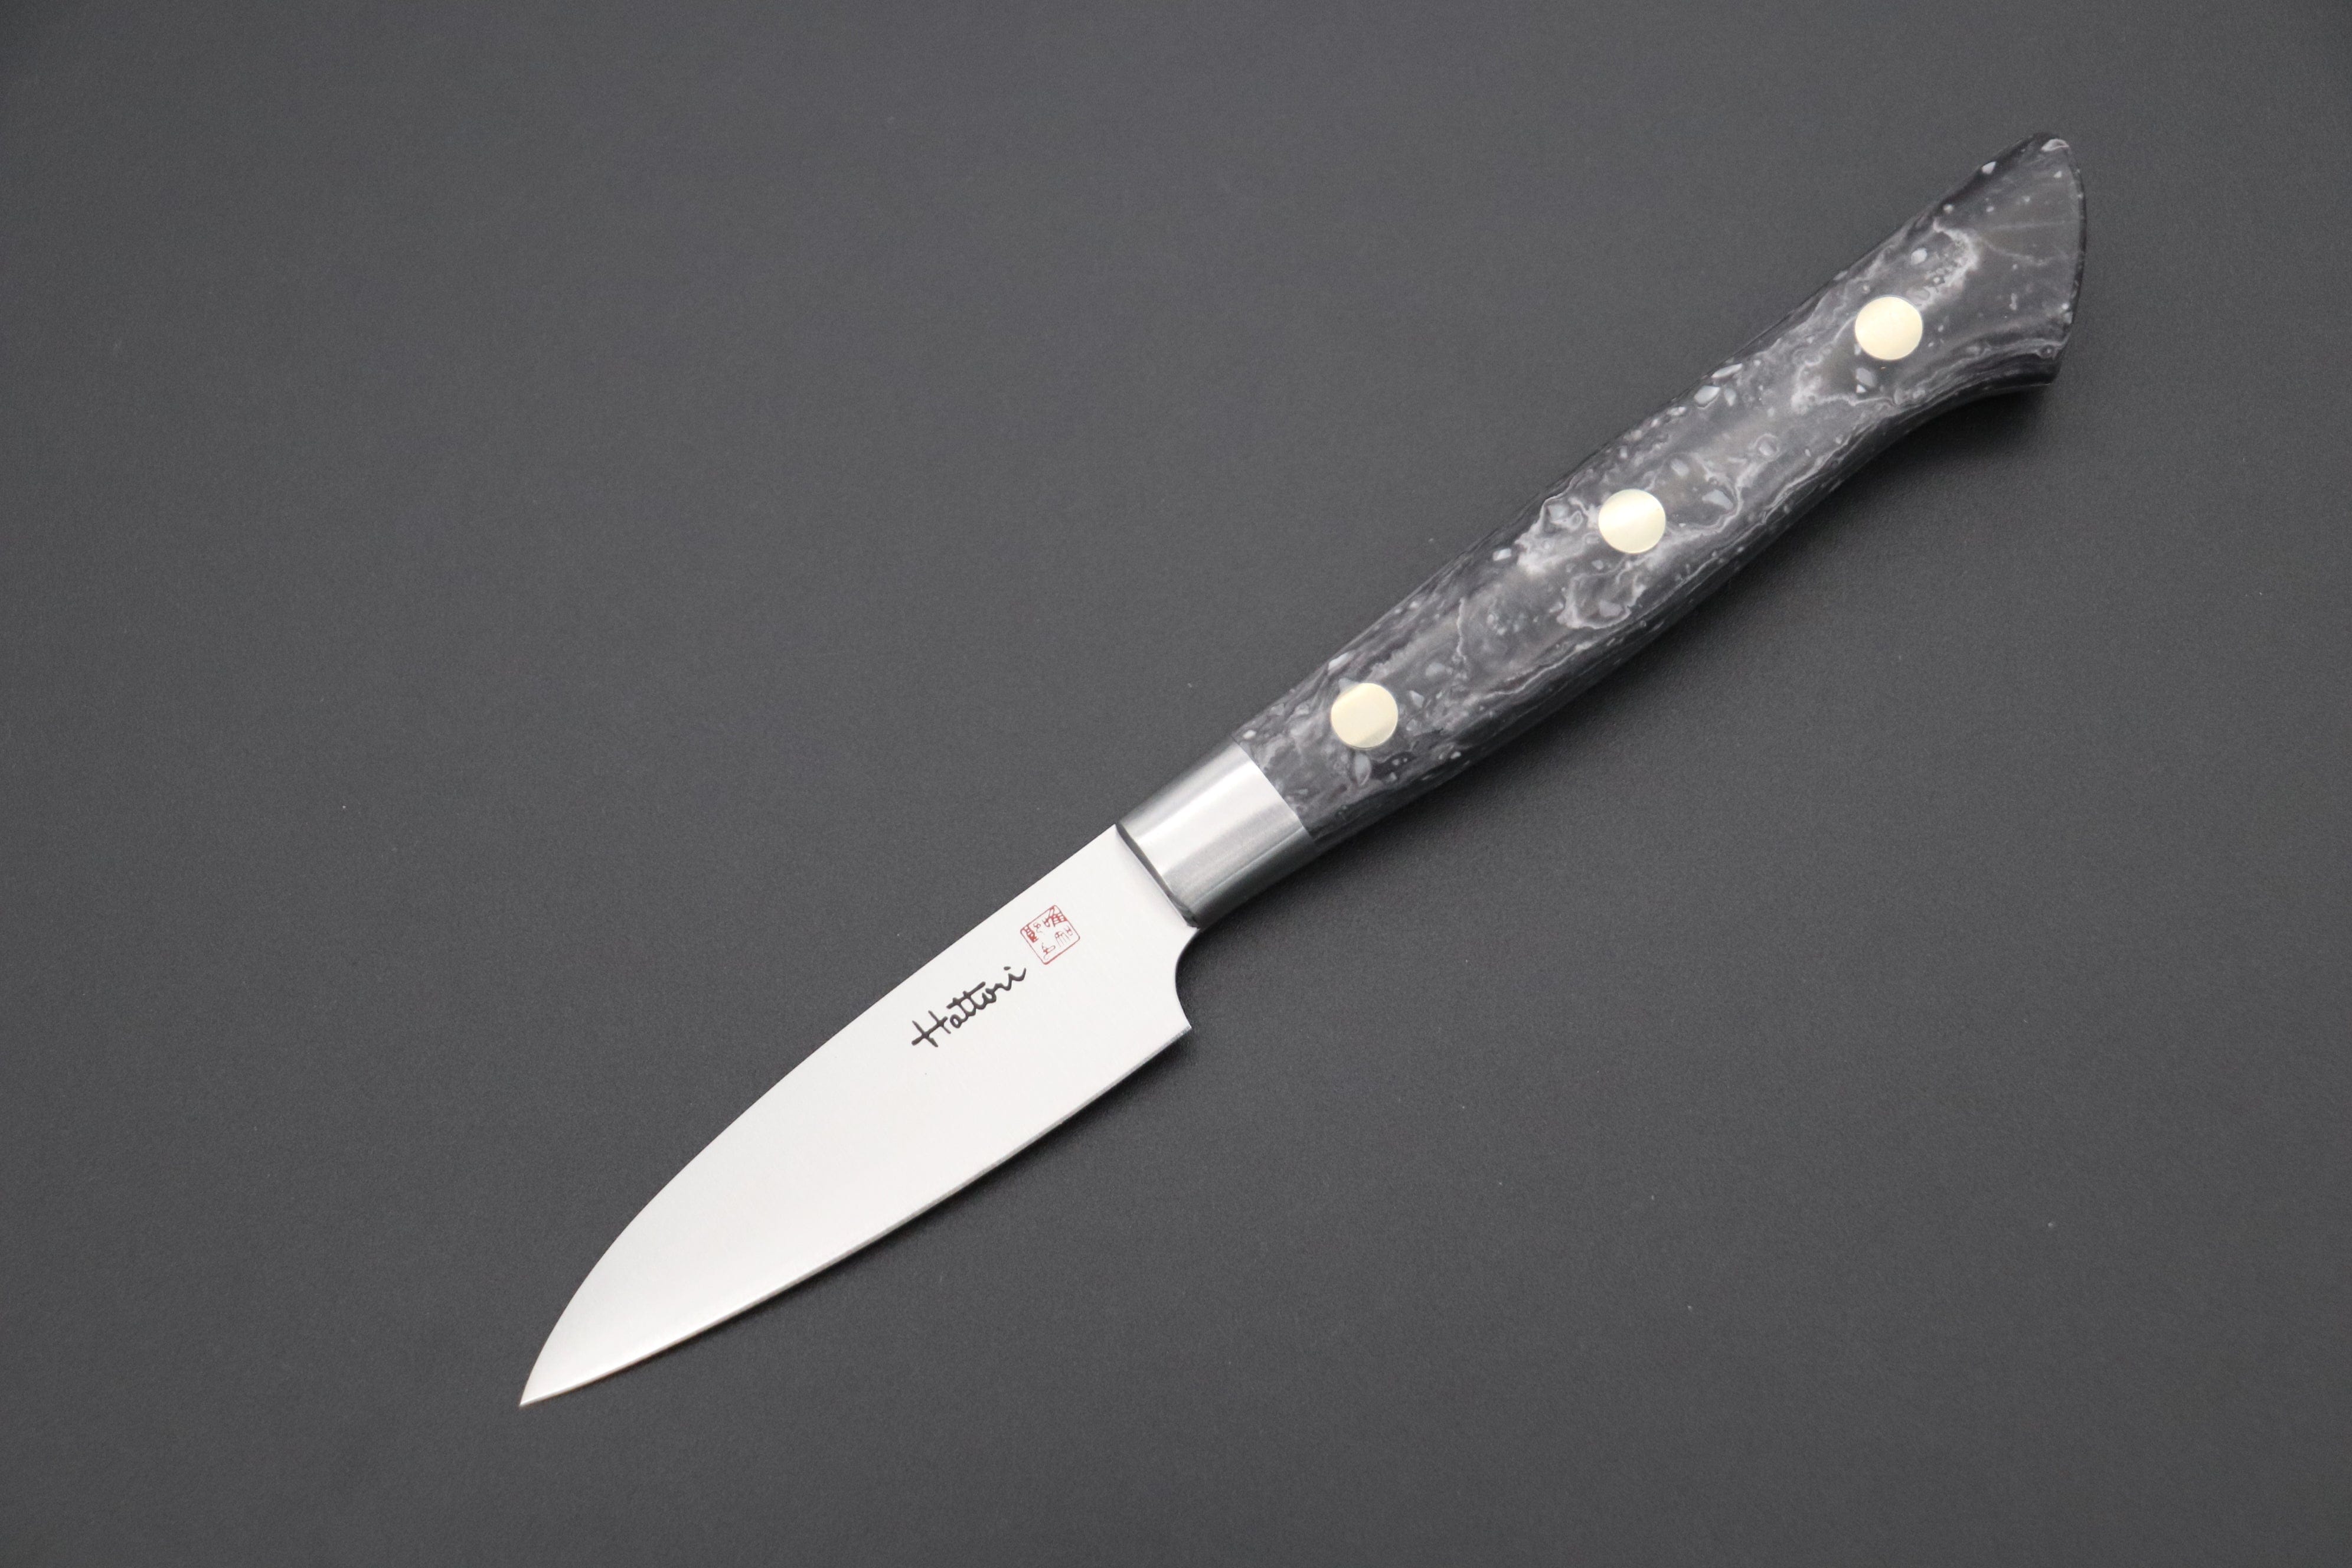 https://japanesechefsknife.com/cdn/shop/products/hattori-paring-hattori-forums-fh-series-limited-edition-snow-in-the-dark-fh-1nd-parer-70mm-2-7-inch-dupont-corian-handle-40239295299867.jpg?v=1673494062